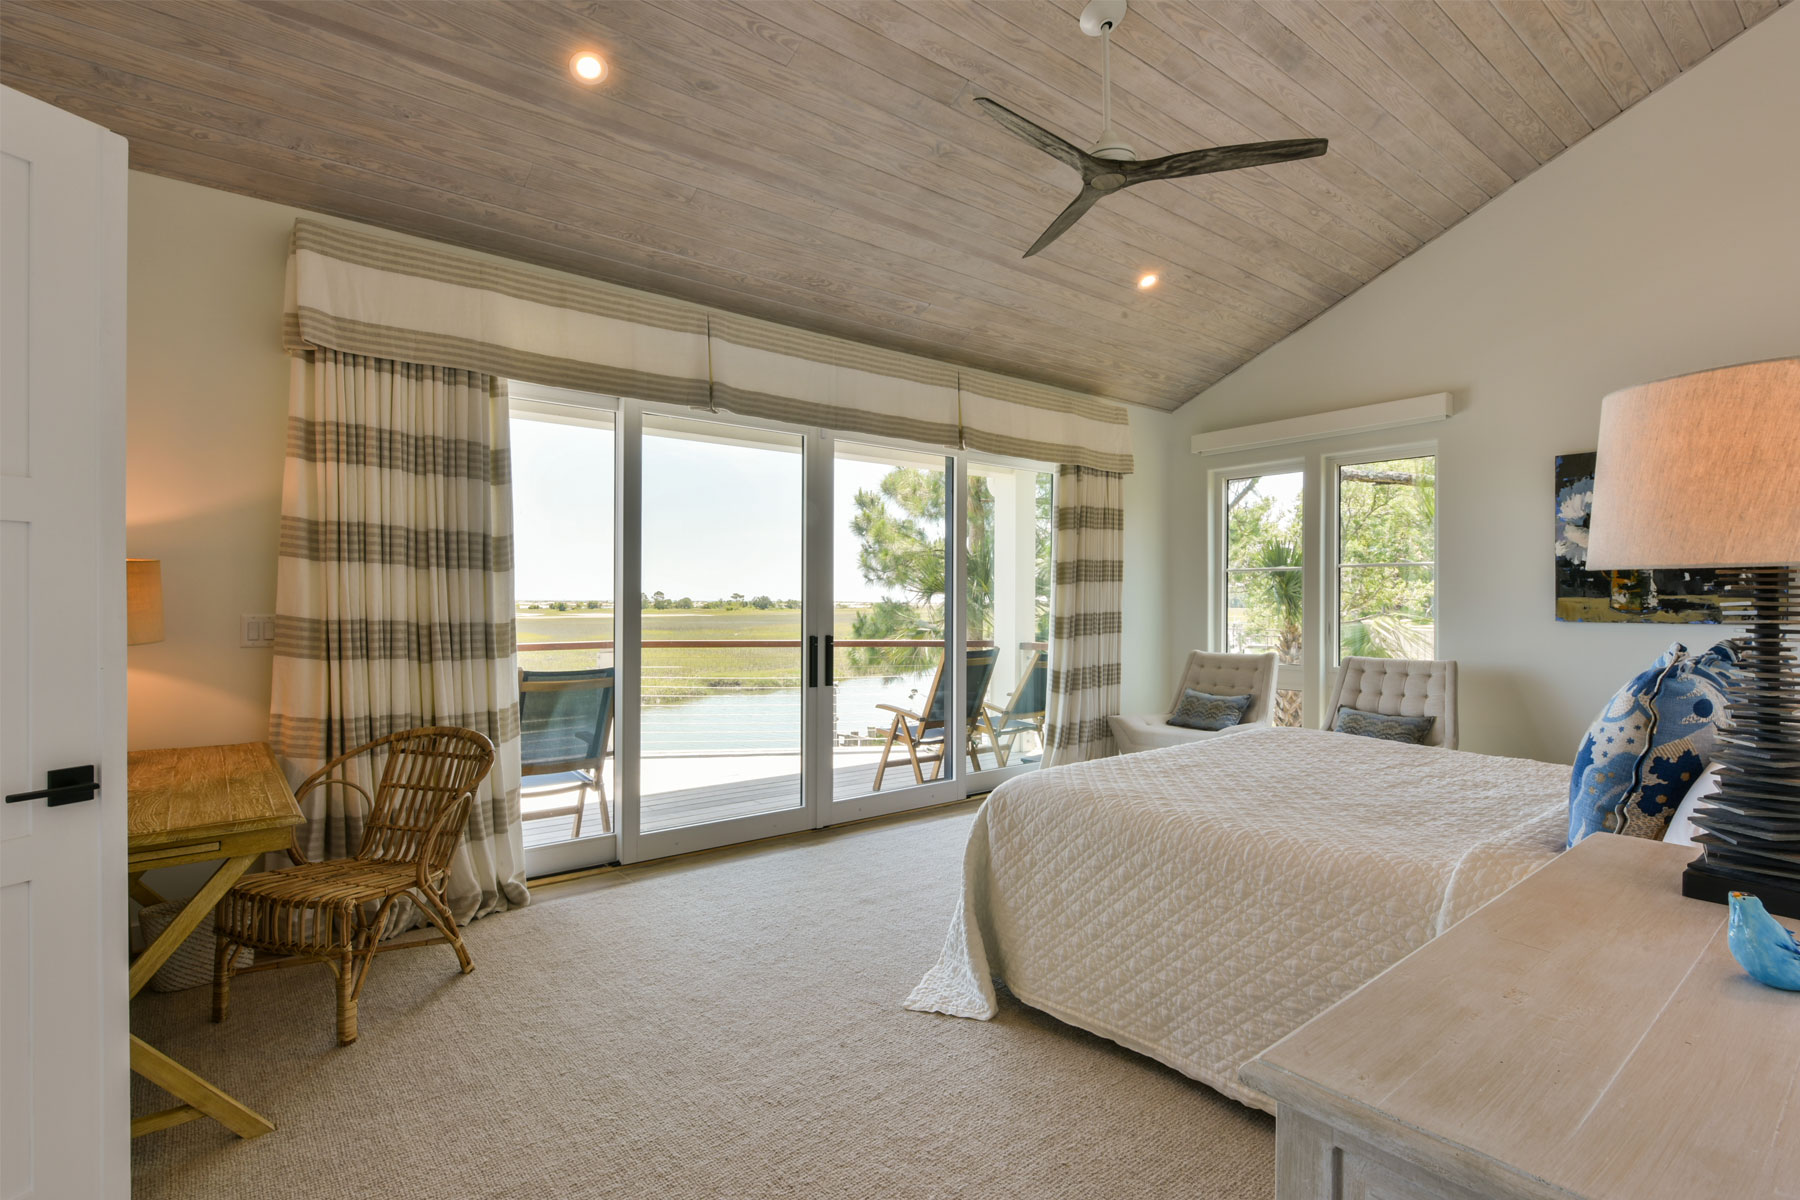 Renovated master bedroom with waterway view